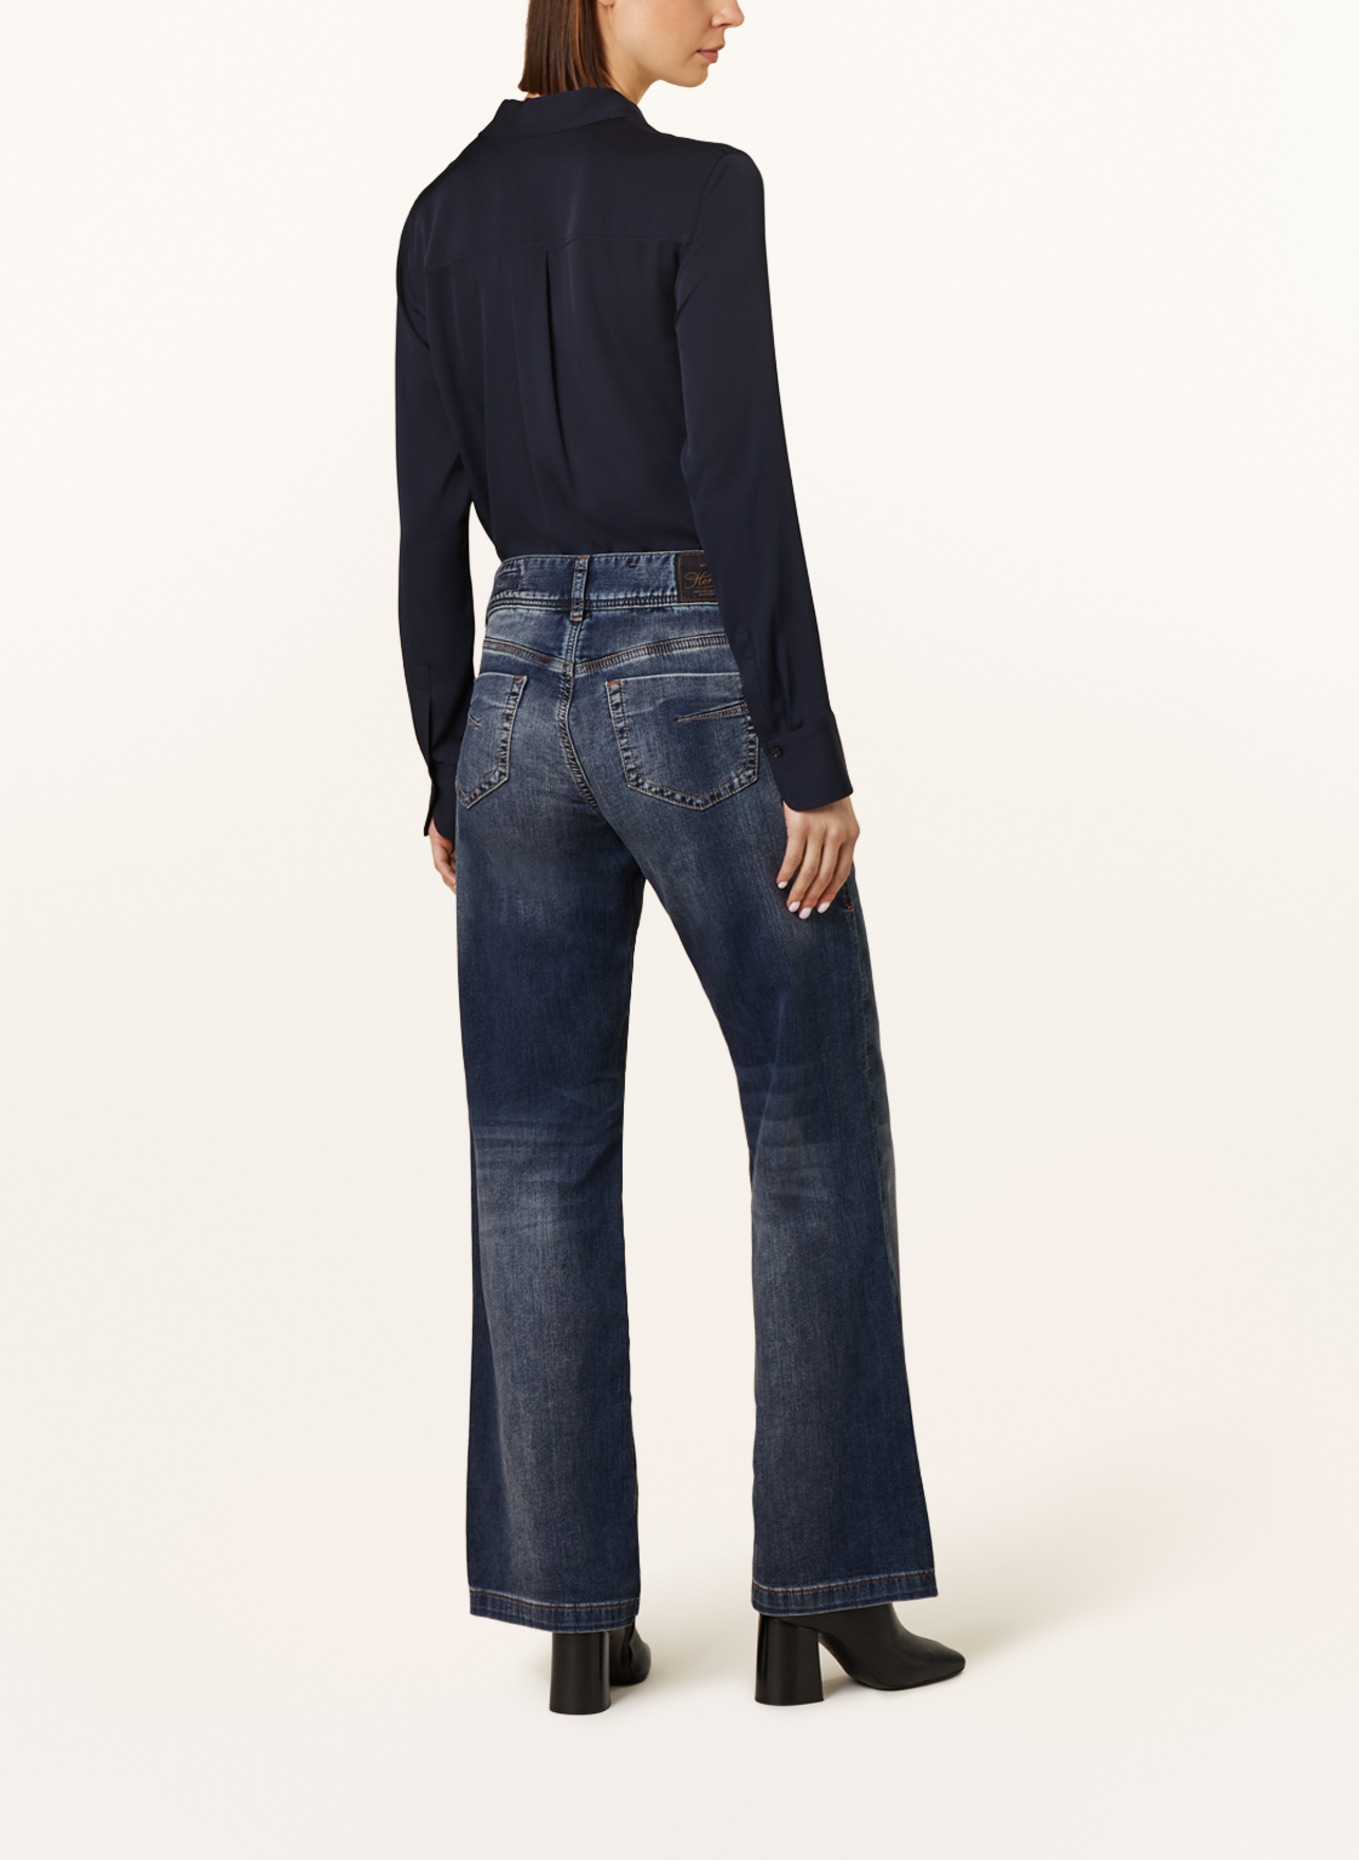 Herrlicher Flared jeans EDNA, Color: 771 releaxed (Image 3)